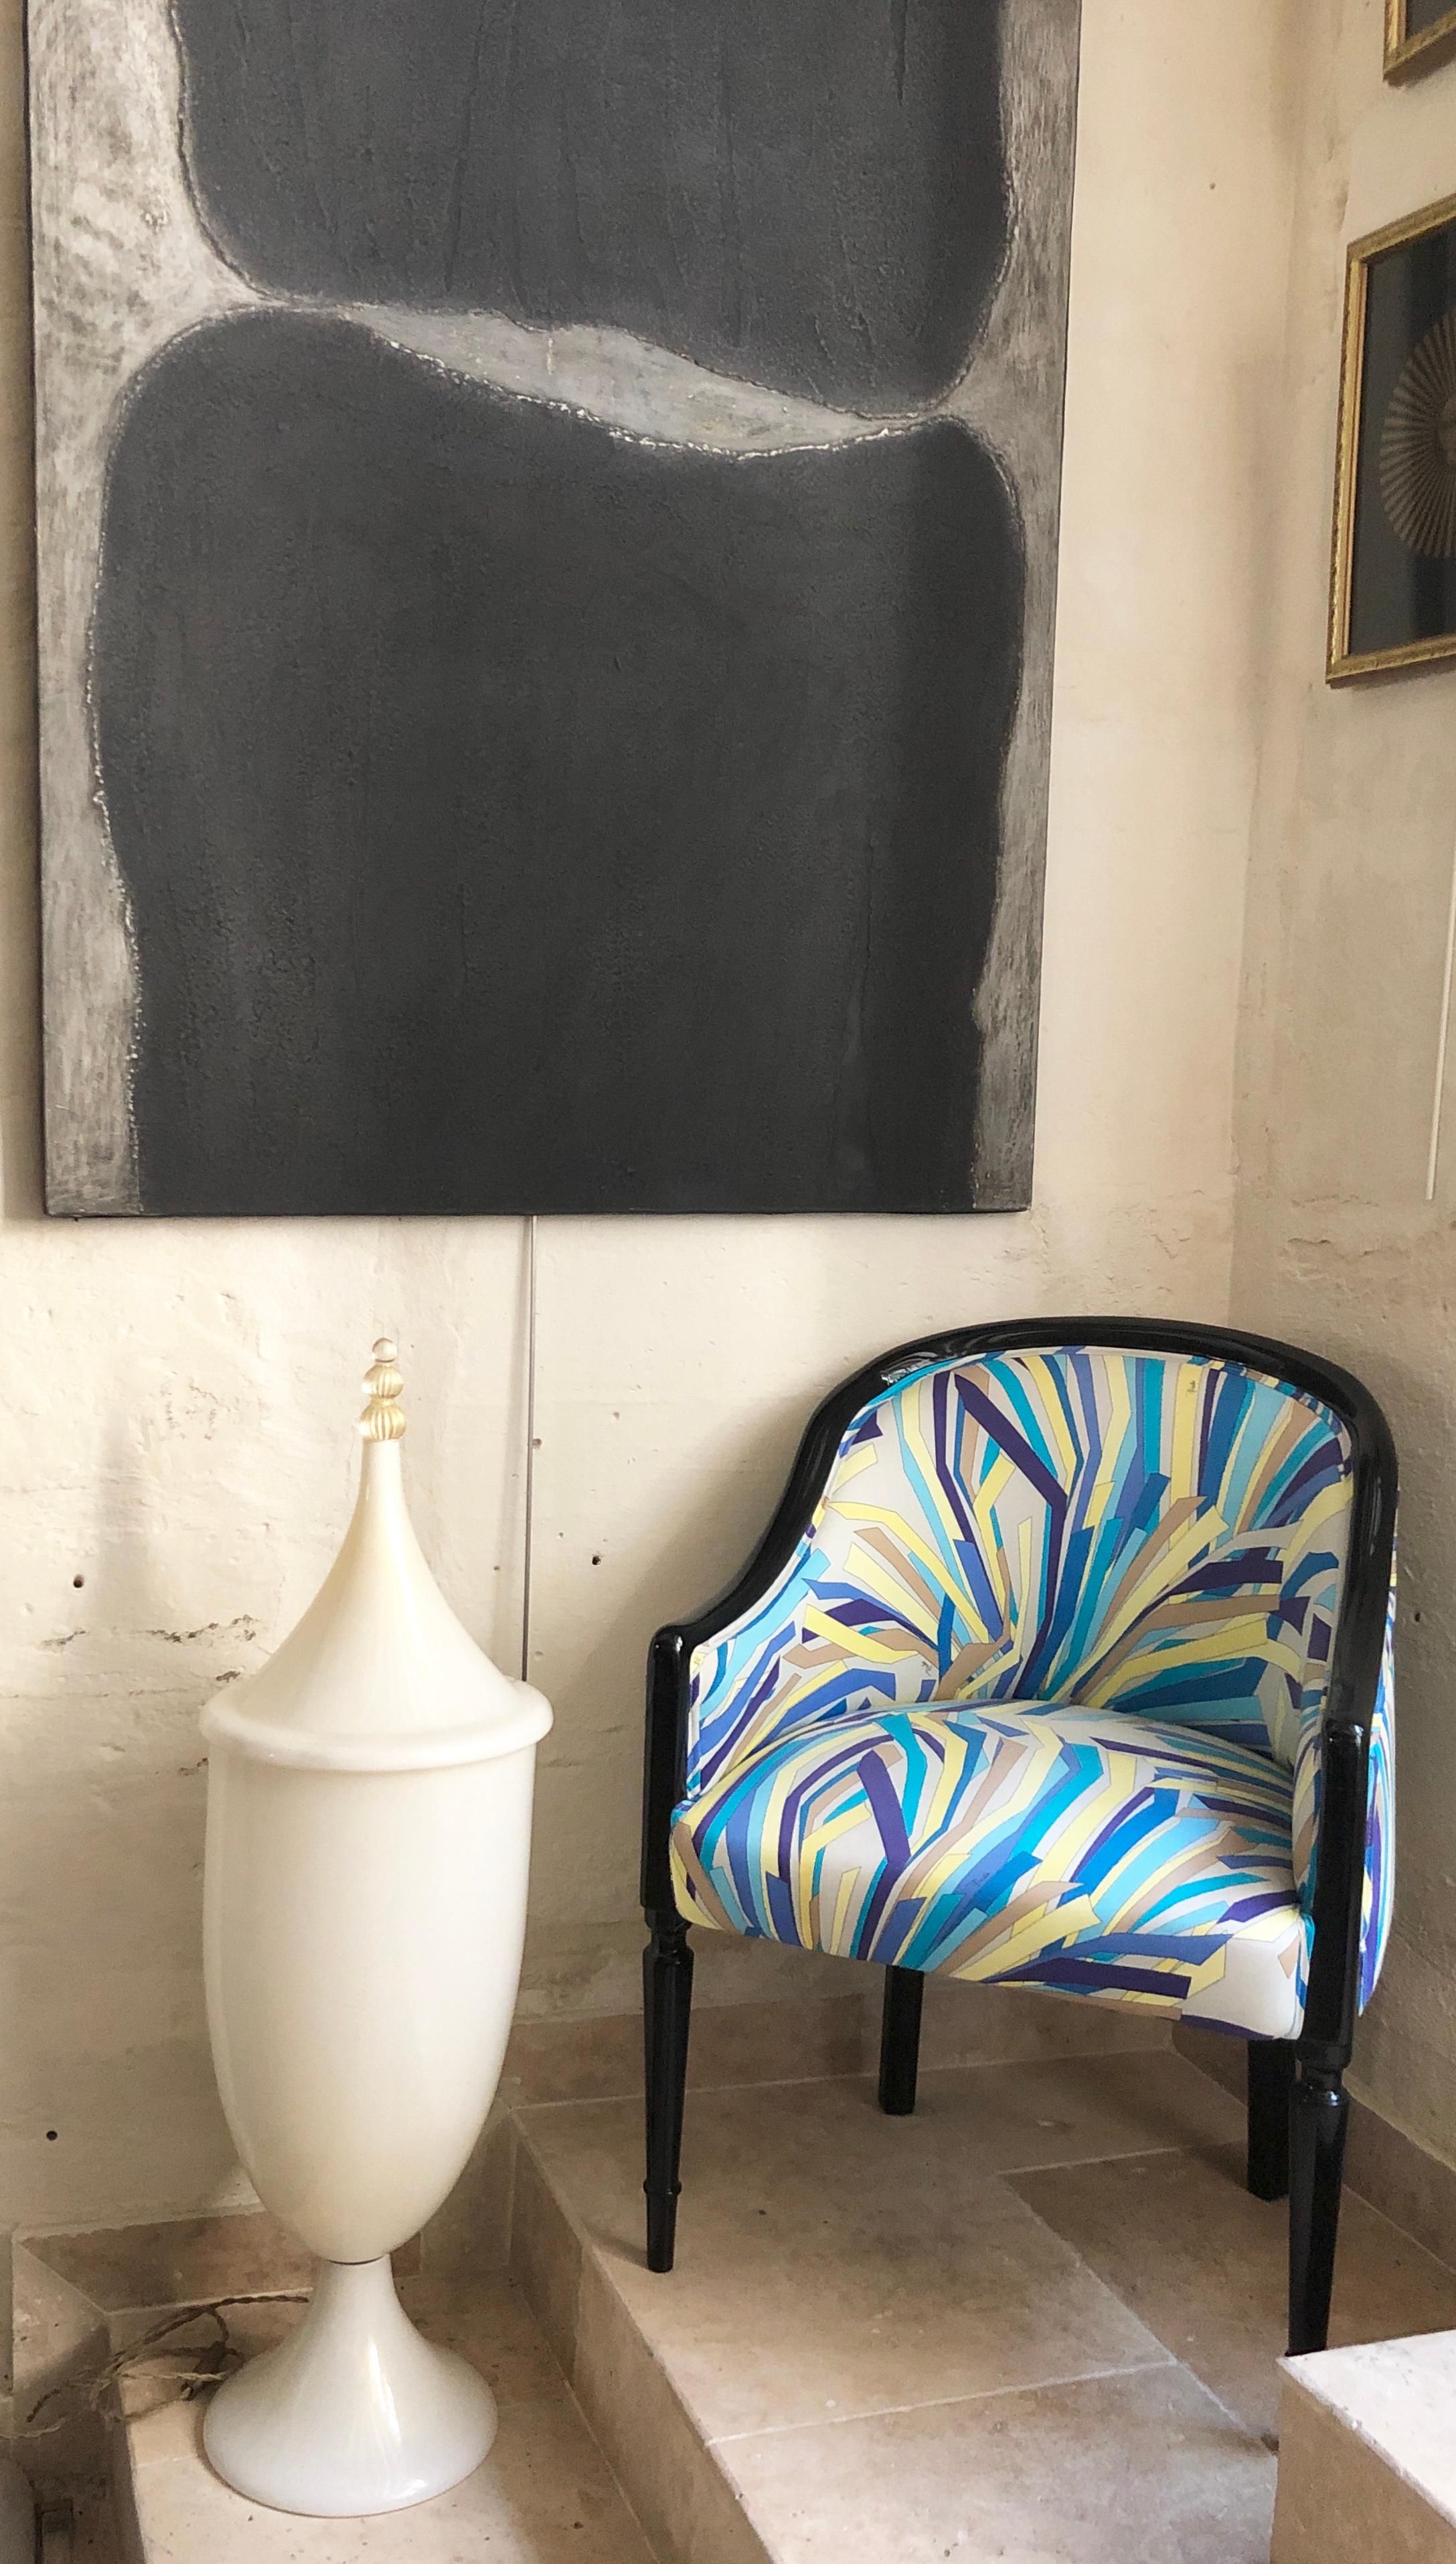 This 1940's vintage tub armchair is dressed in an Emilio Pucci 1970s fabric. Black lacquered legs serve as the perfect contrast to this abstract cool-toned pattern of blue, green, and cream. This original chair was recovered later with Pucci's 1970s